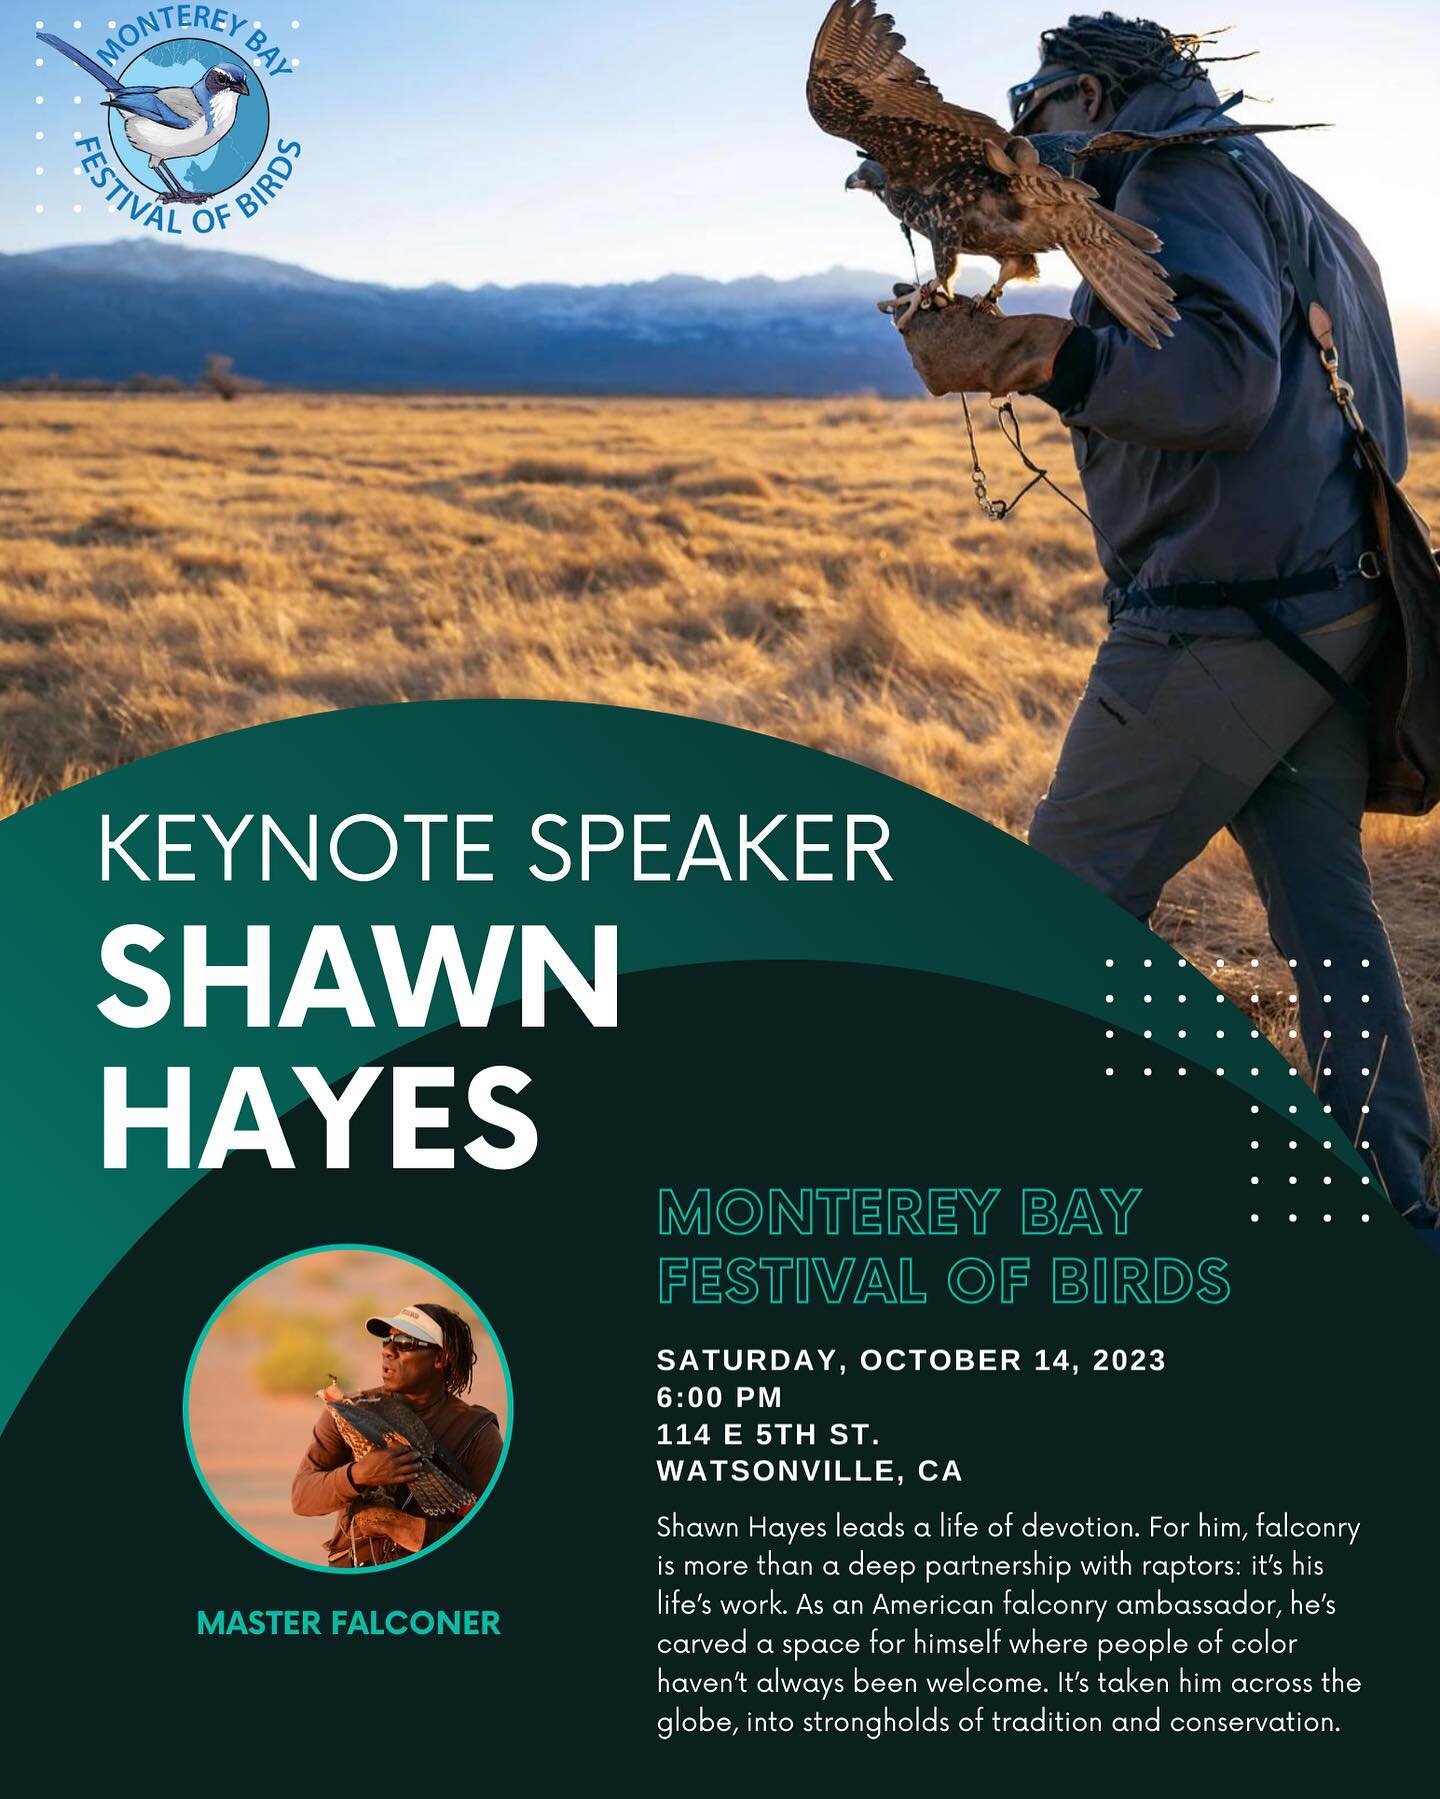 We&rsquo;re so excited to host Master Falconer and Game Hawker, Shawn Hayes, as the Monterey Bay Festival of Birds keynote speaker! You don&rsquo;t want to miss this event,  join us and become captivated by Shawn&rsquo;s amazing story telling. 

FREE